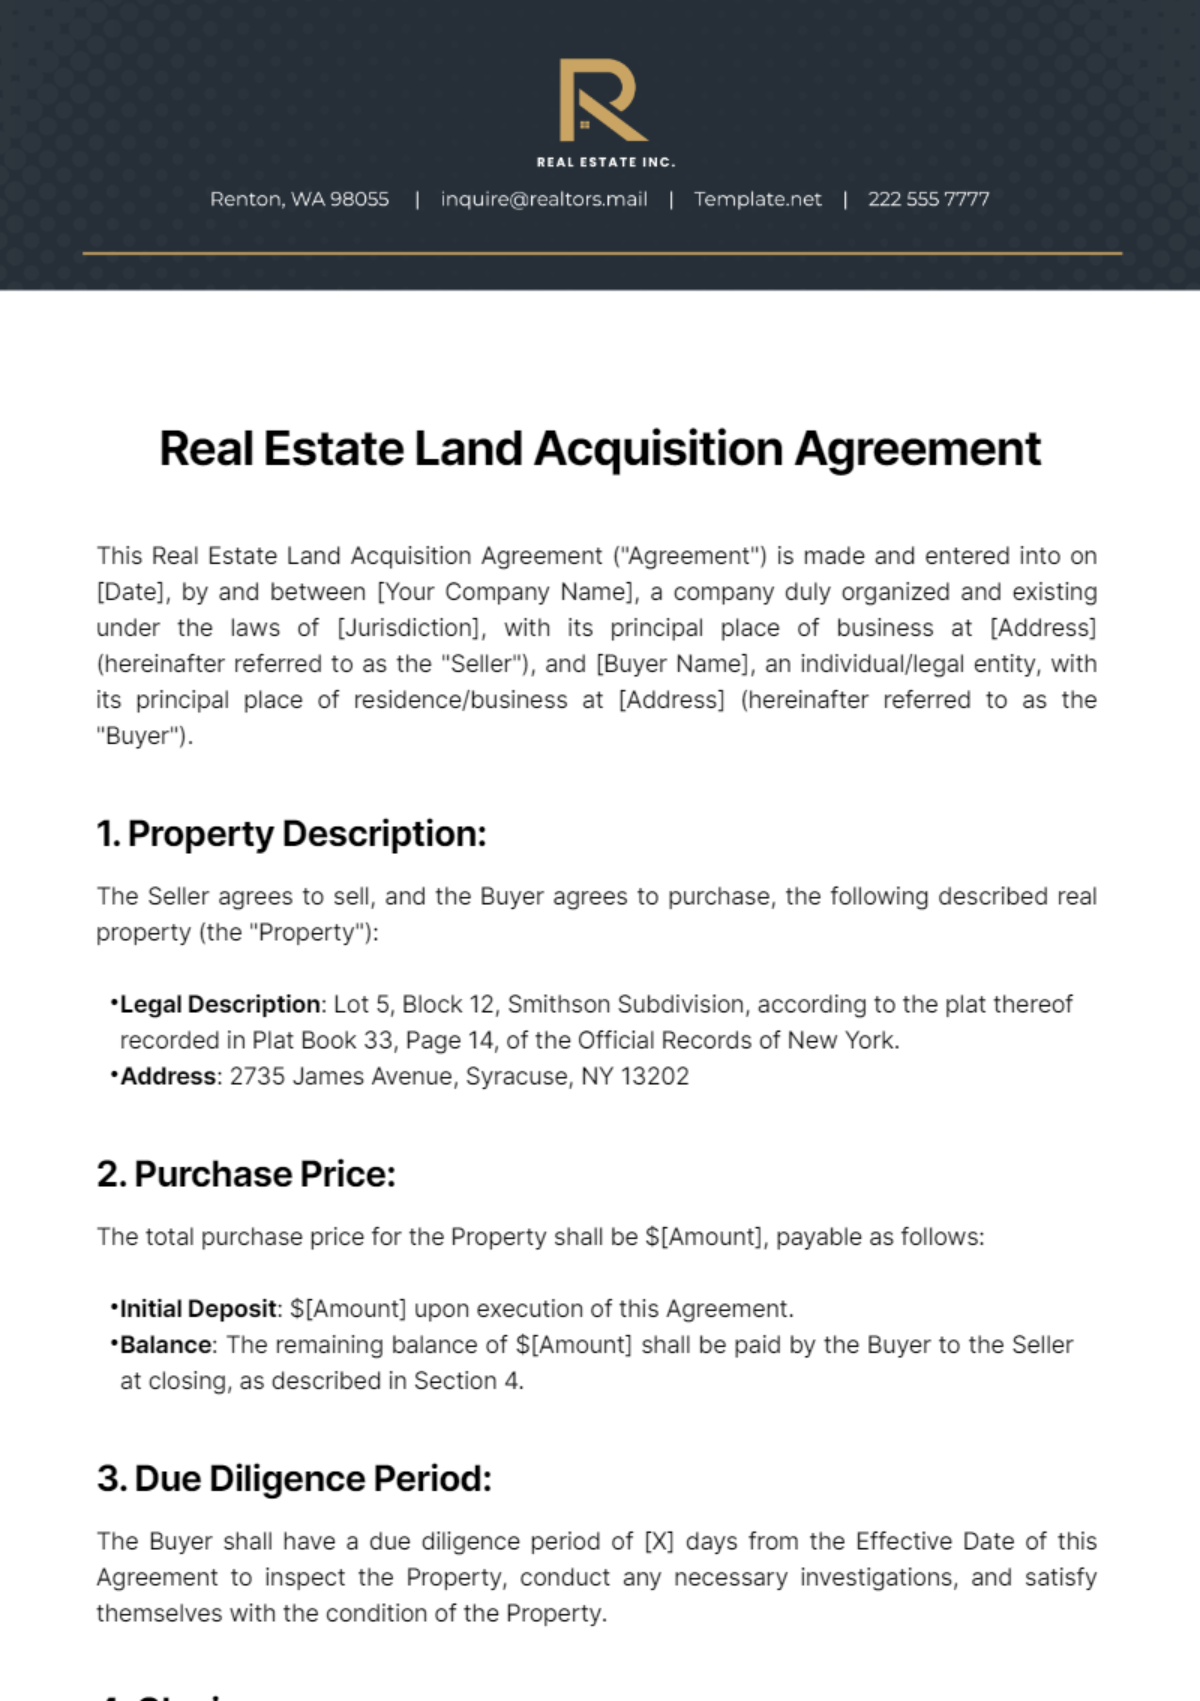 Real Estate Land Acquisition Agreement Template